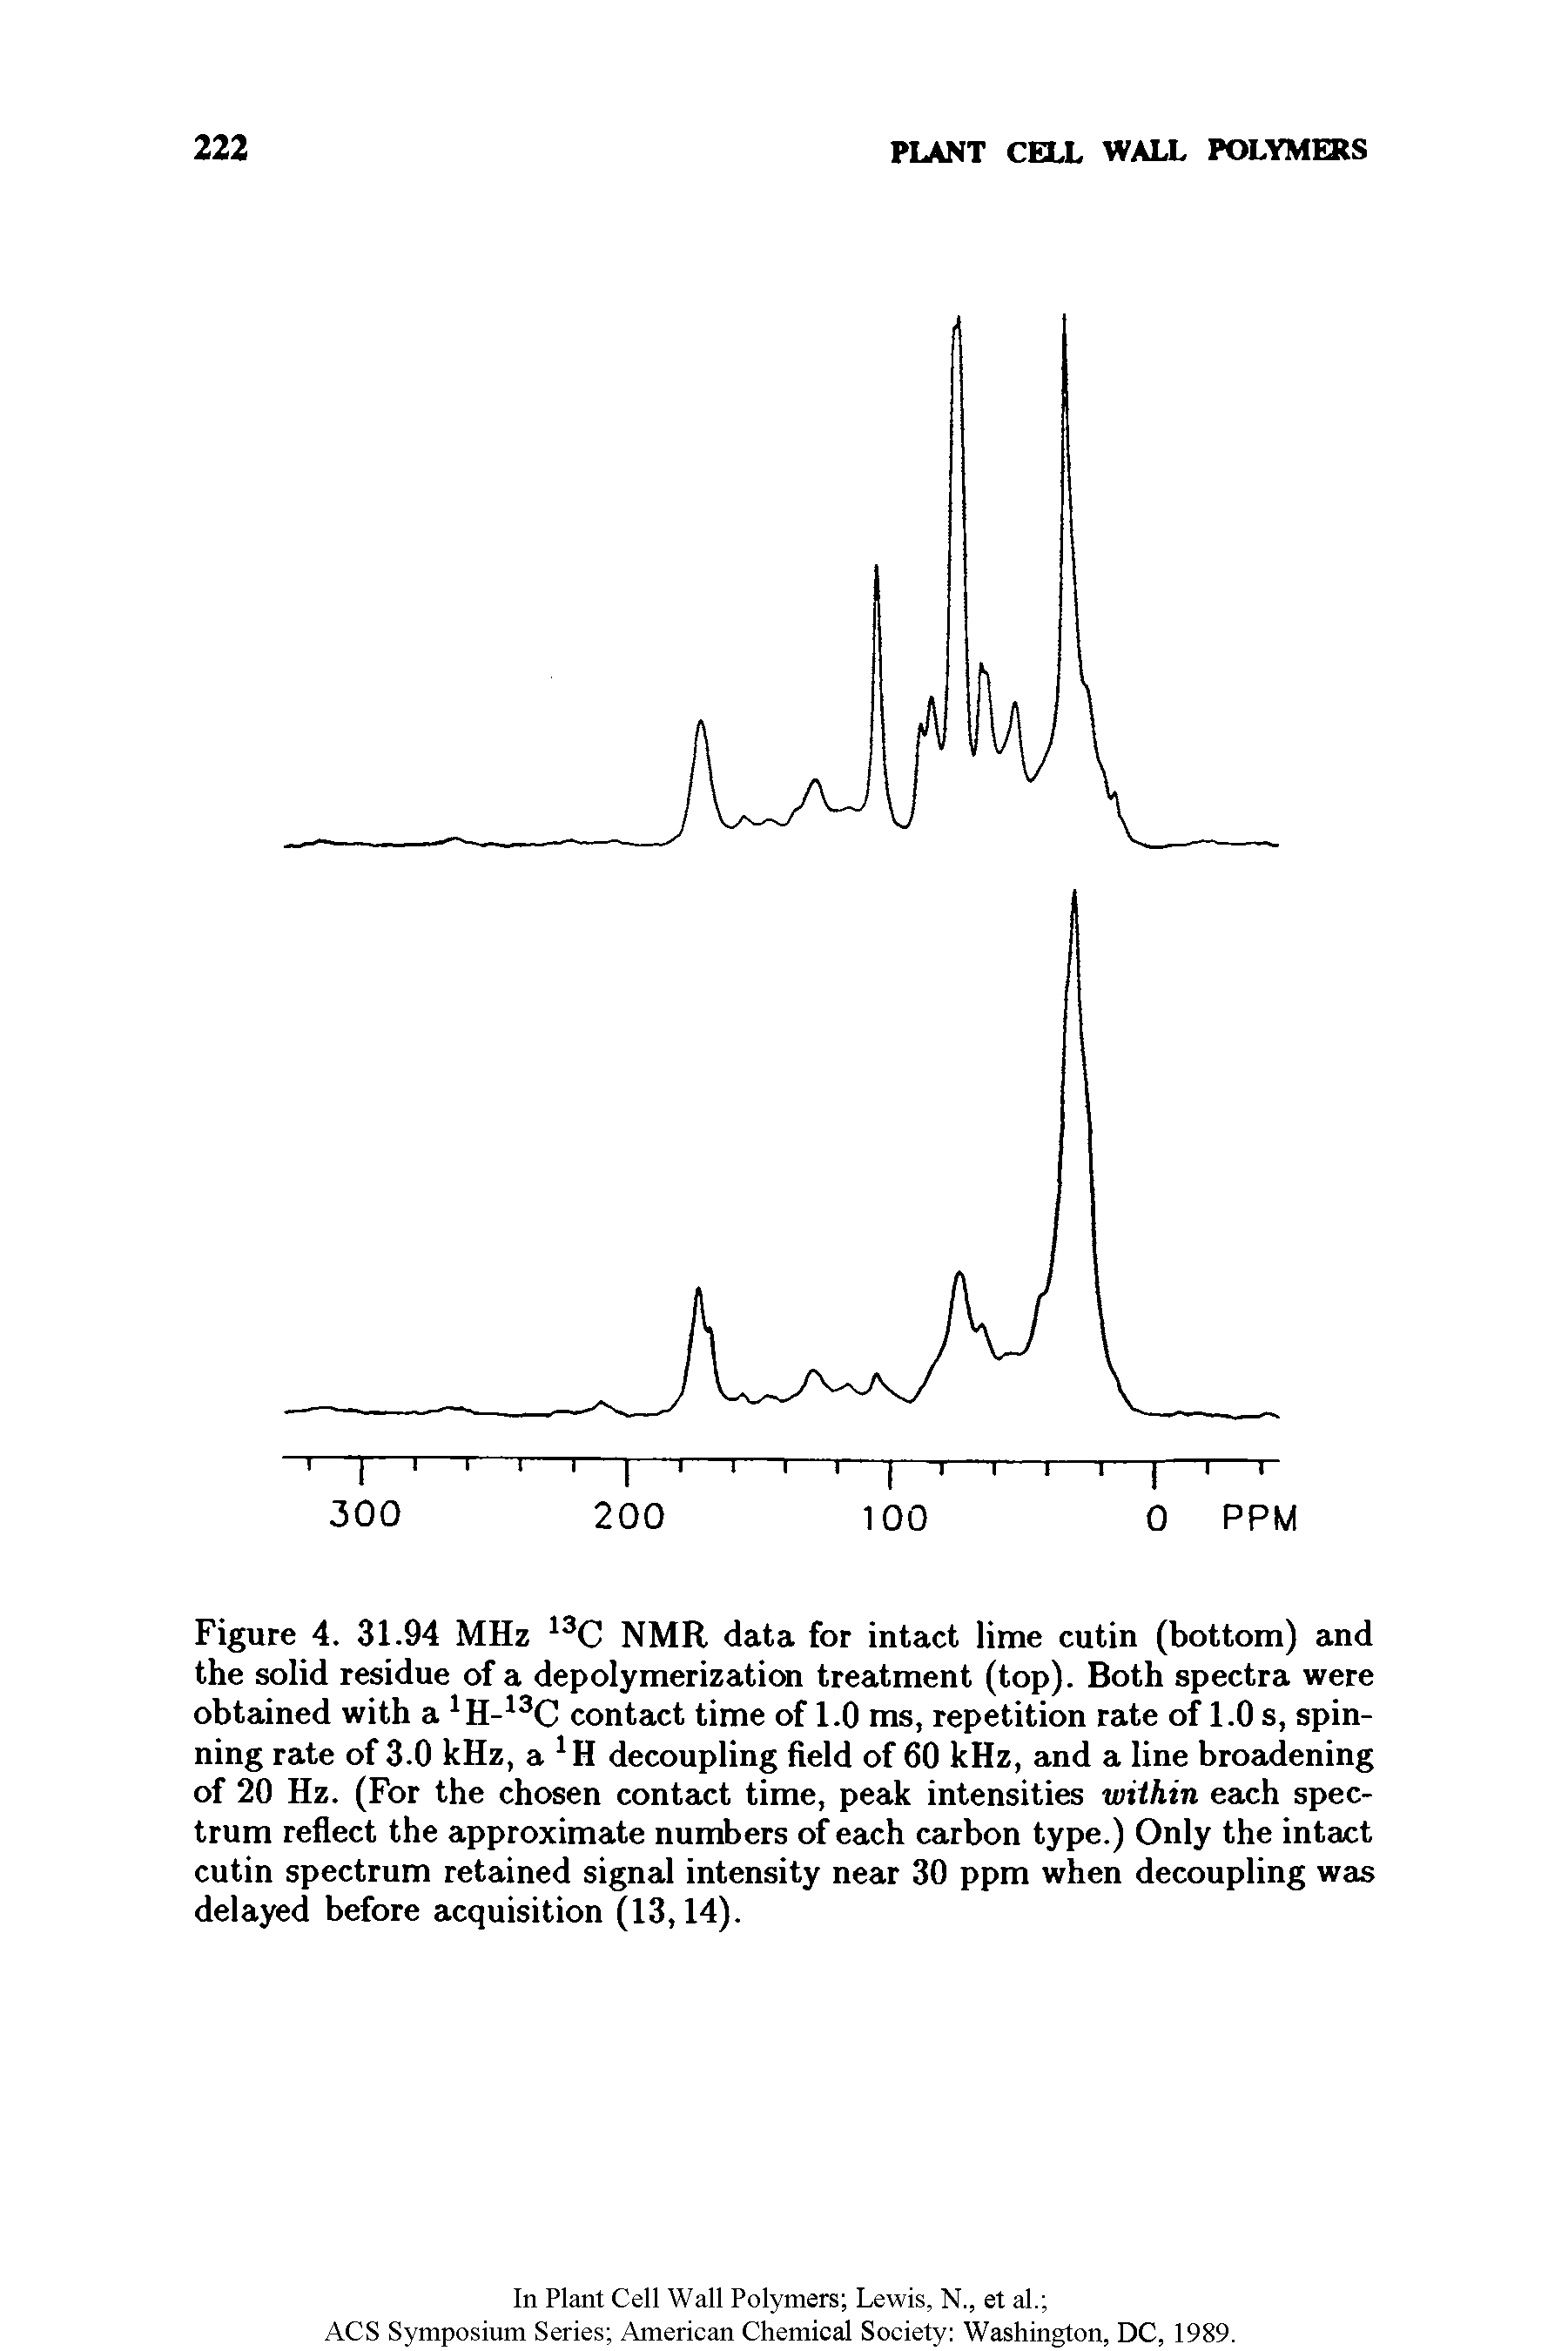 Figure 4. 31.94 MHz 13C NMR data for intact lime cutin (bottom) and the solid residue of a depolymerization treatment (top). Both spectra were obtained with a 1H-13C contact time of 1.0 ms, repetition rate of 1.0 s, spinning rate of 3.0 kHz, a H decoupling field of 60 kHz, and a line broadening of 20 Hz. (For the chosen contact time, peak intensities within each spectrum reflect the approximate numbers of each carbon type.) Only the intact cutin spectrum retained signal intensity near 30 ppm when decoupling was delayed before acquisition (13,14).